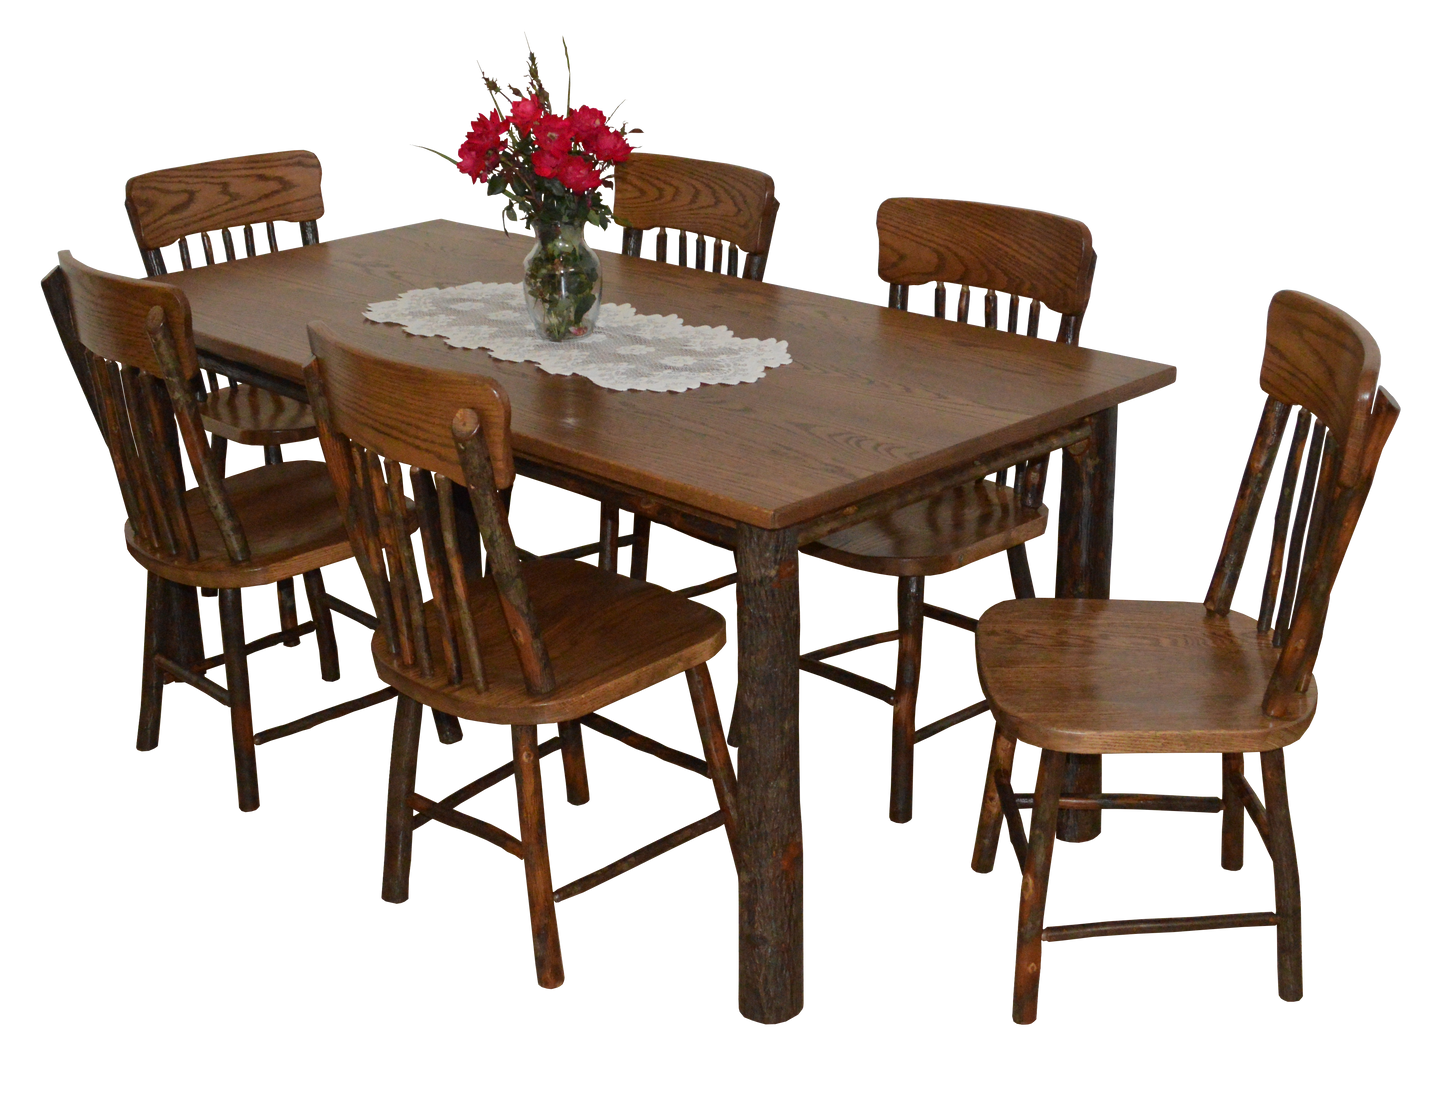 A&L Furniture Co. Hickory 7 Piece Farm Table Dining Set - LEAD TIME TO SHIP 10 BUSINESS DAYS